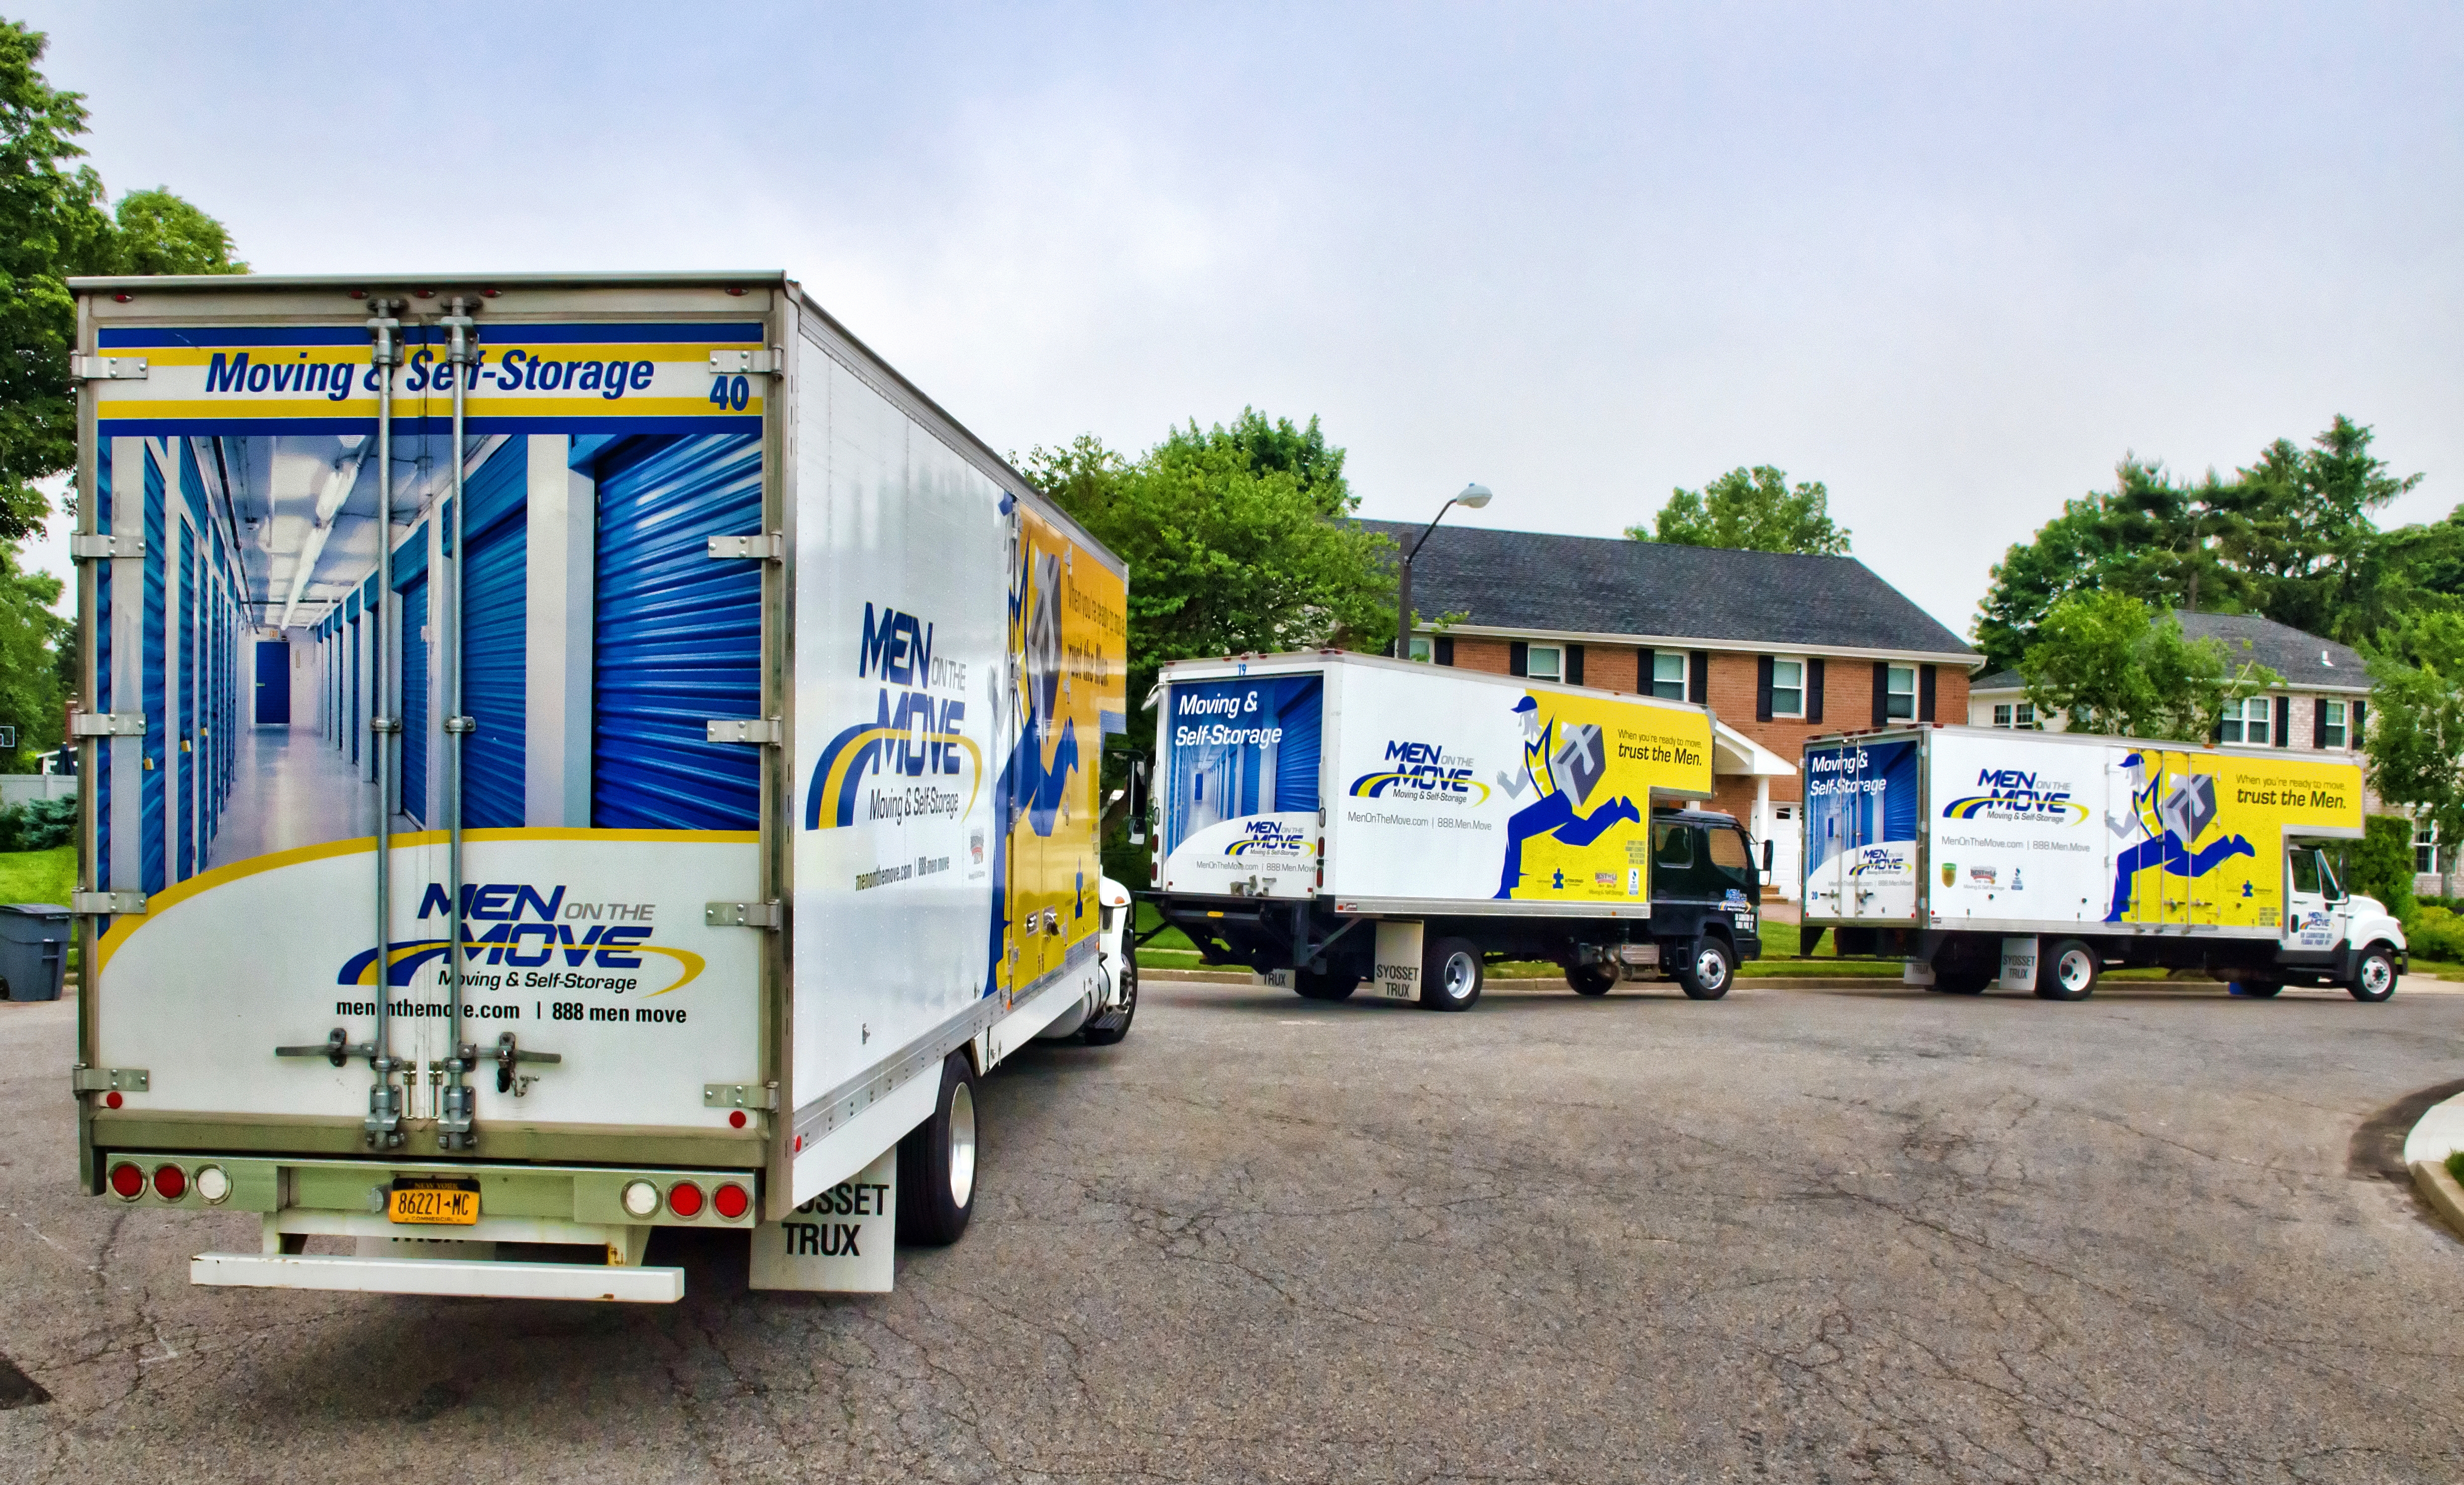 Men On The Move Moving & Self-Storage About Us - Long Island, NY